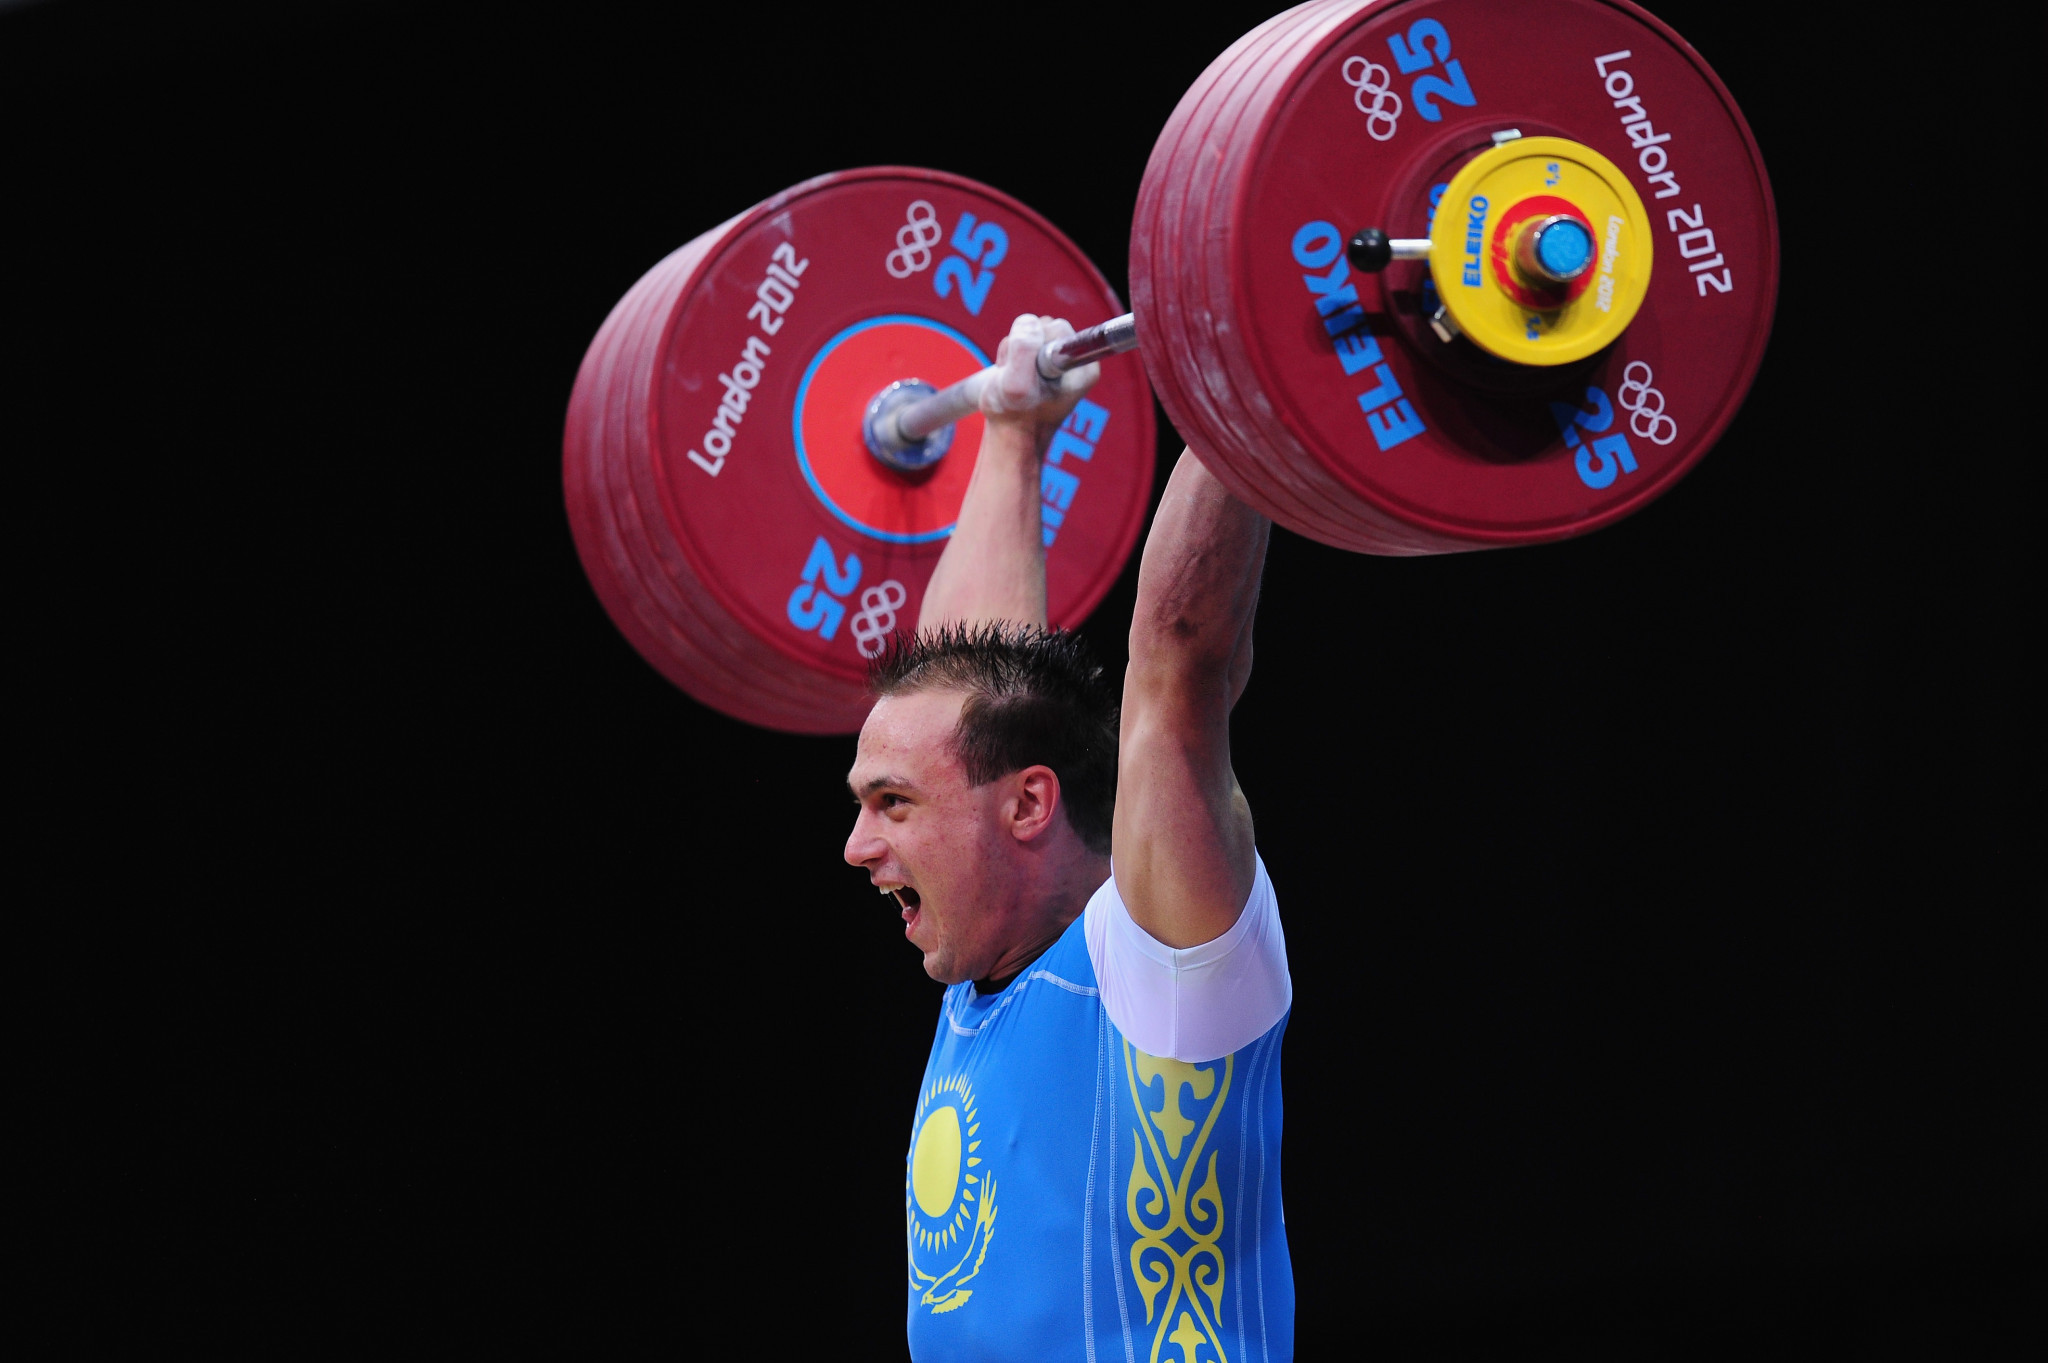 Ilya Ilyin was one of the most notable weightlifters to have his London 2012 records wiped for doping ©Getty Images